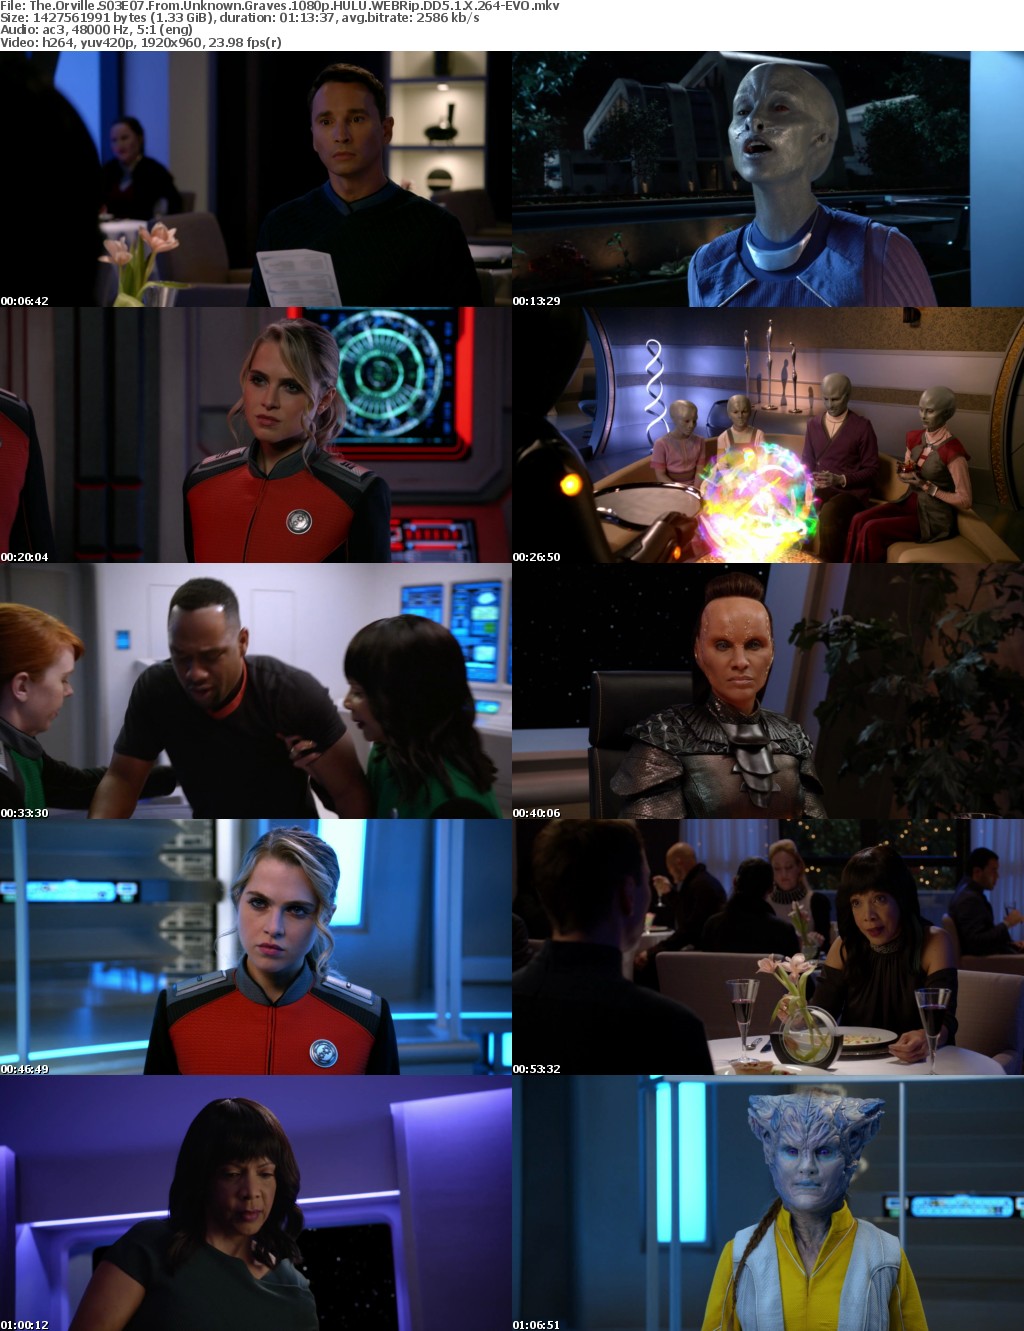 The Orville S03E07 From Unknown Graves 1080p HULU WEBRip DD5 1 X 264-EVO